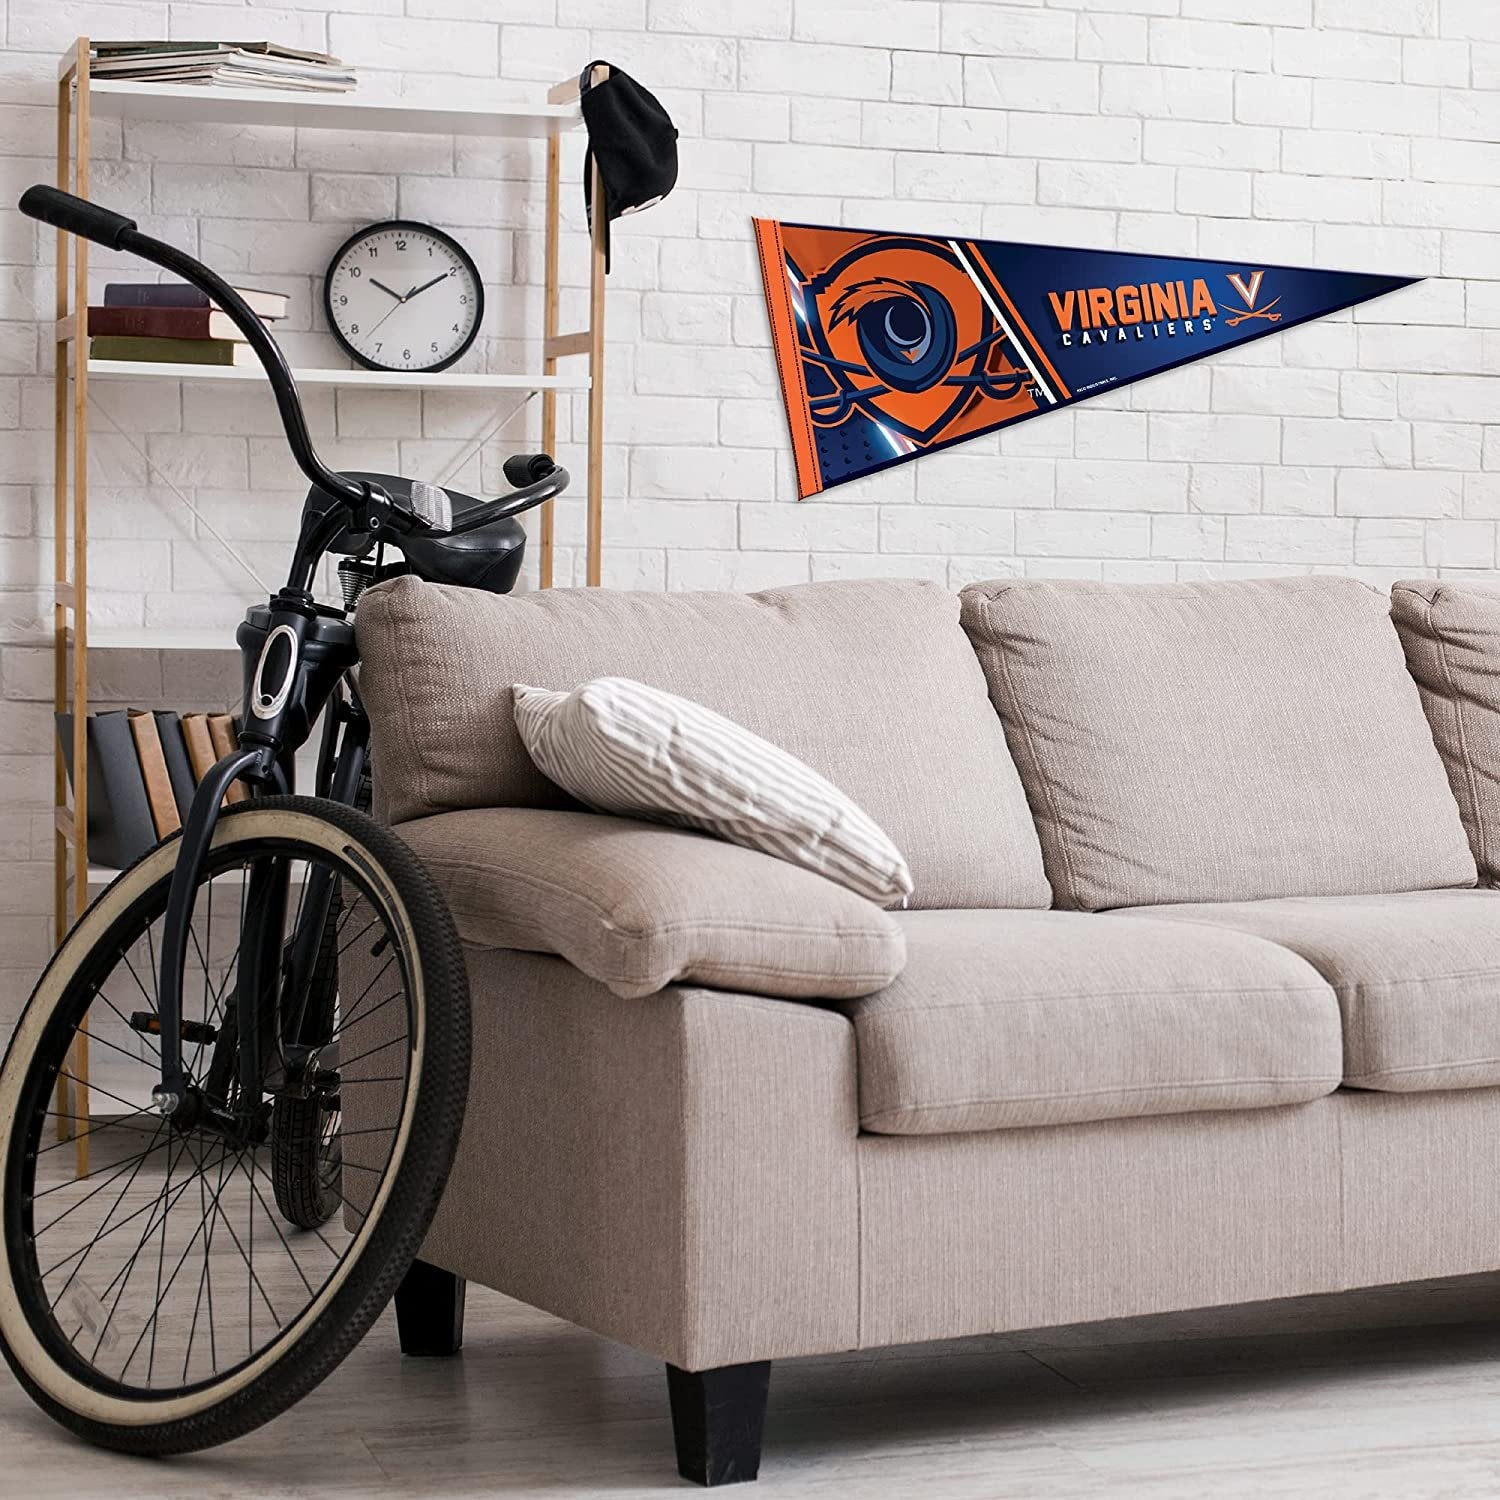 University of Virginia Cavaliers Soft Felt Pennant, Primary Design, 12x30 Inch, Easy To Hang